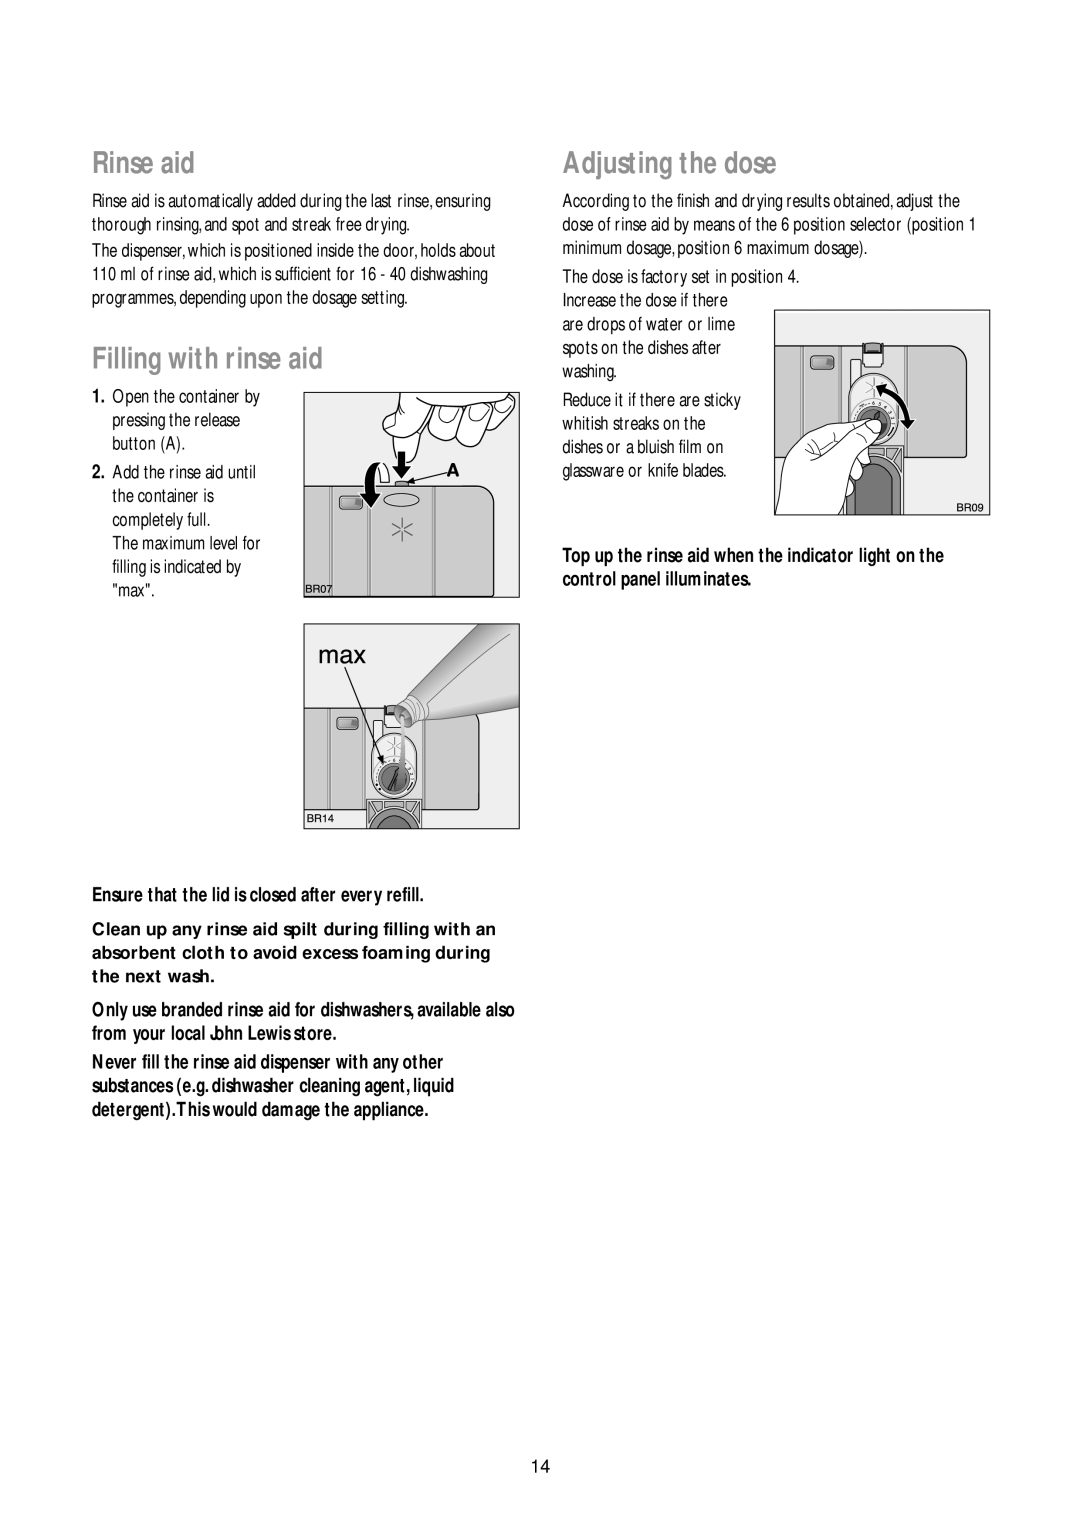 John Lewis JLBIDW 901 instruction manual Rinse aid, Filling with rinse aid, Adjusting the dose 